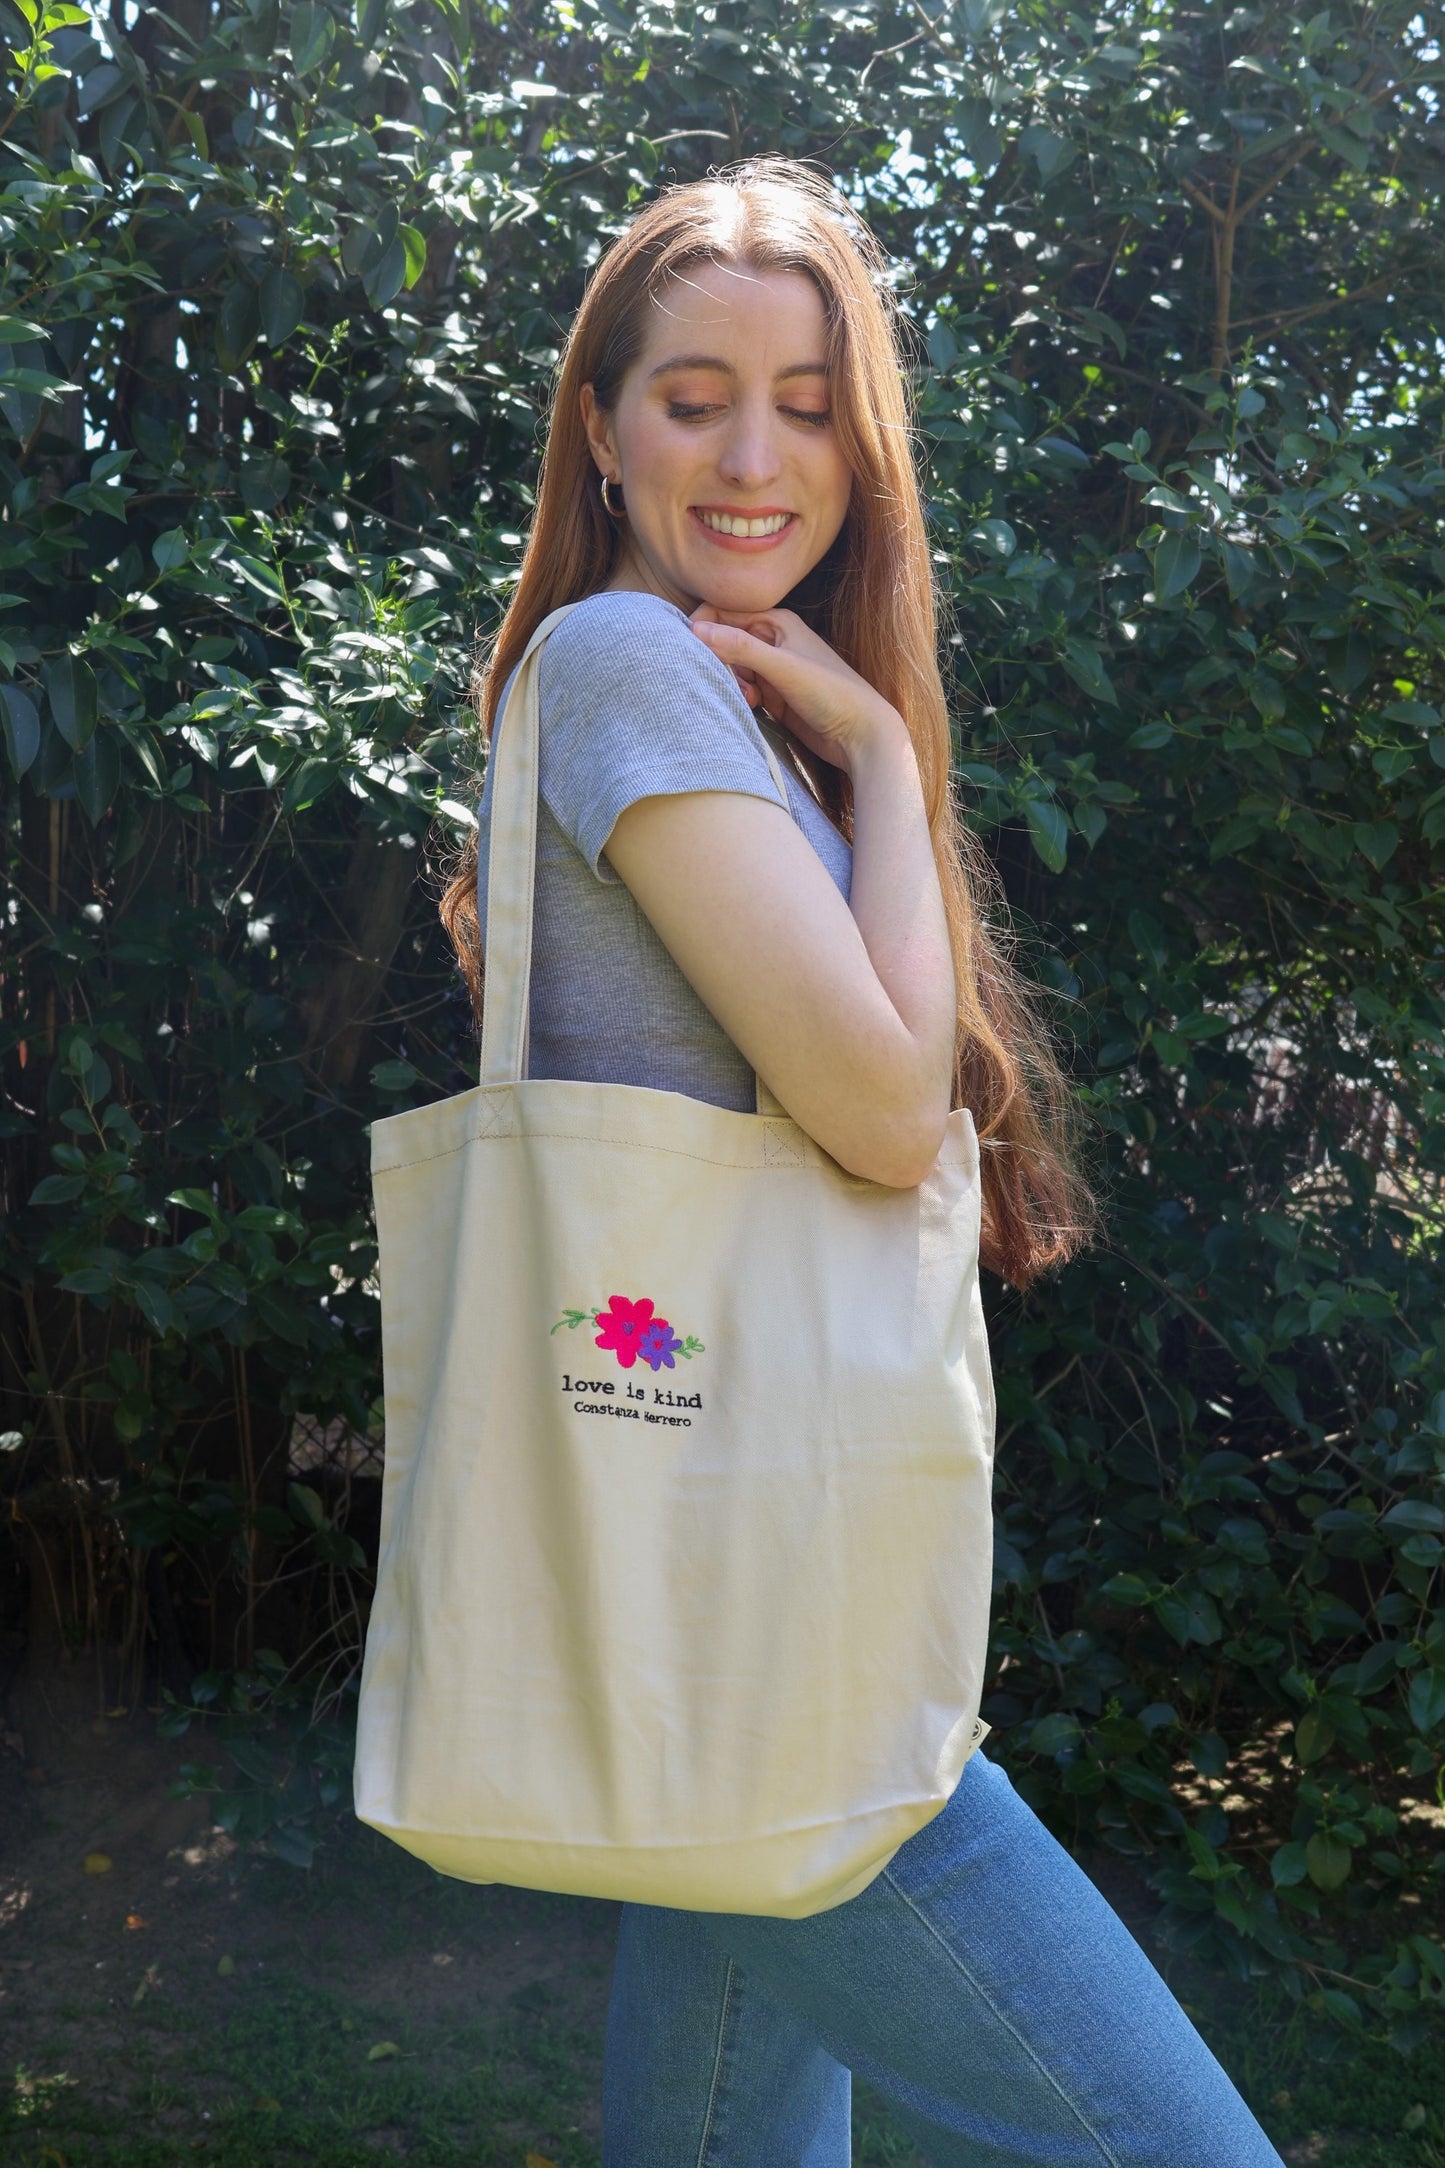 Love Is Kind (embroidered) - Eco Tote Bag